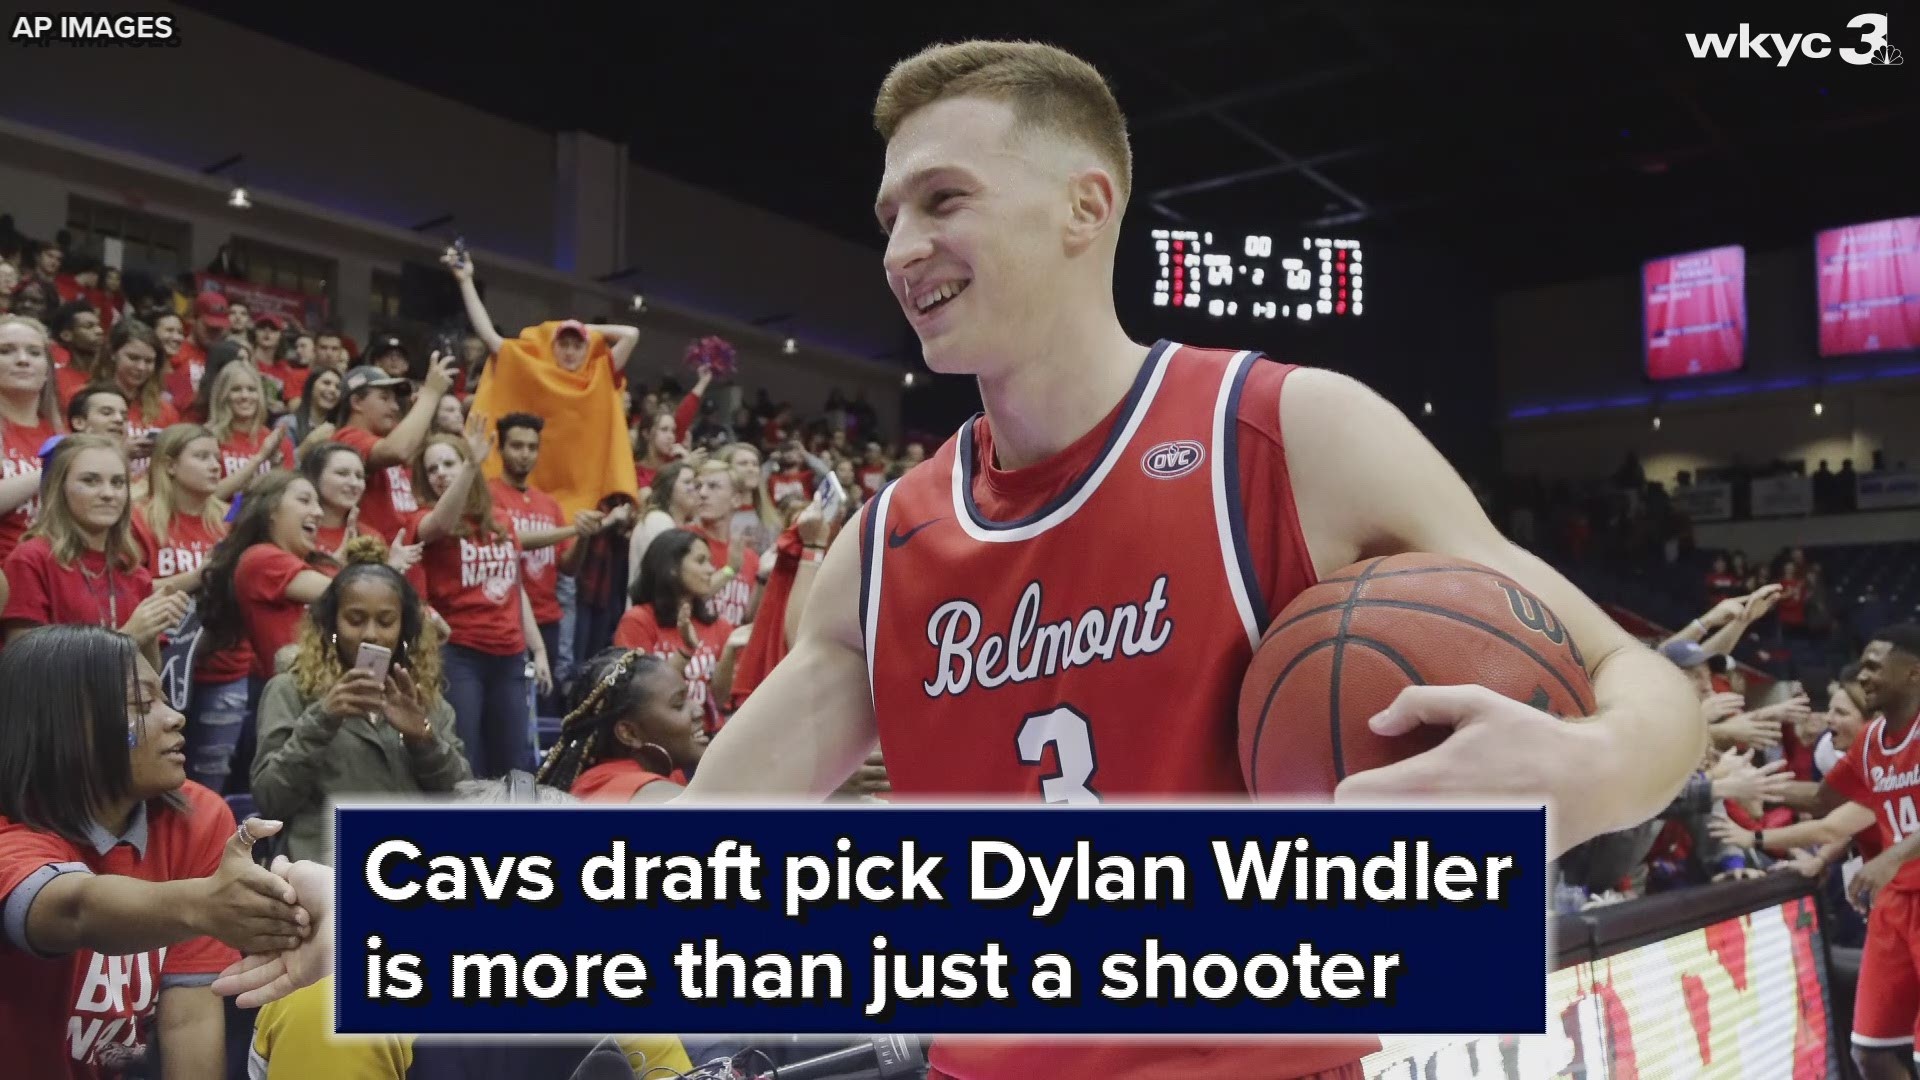 While Dylan Windler is an impressive 3-point shooter, the Cleveland Cavaliers' first round pick possesses plenty of other abilities as well.